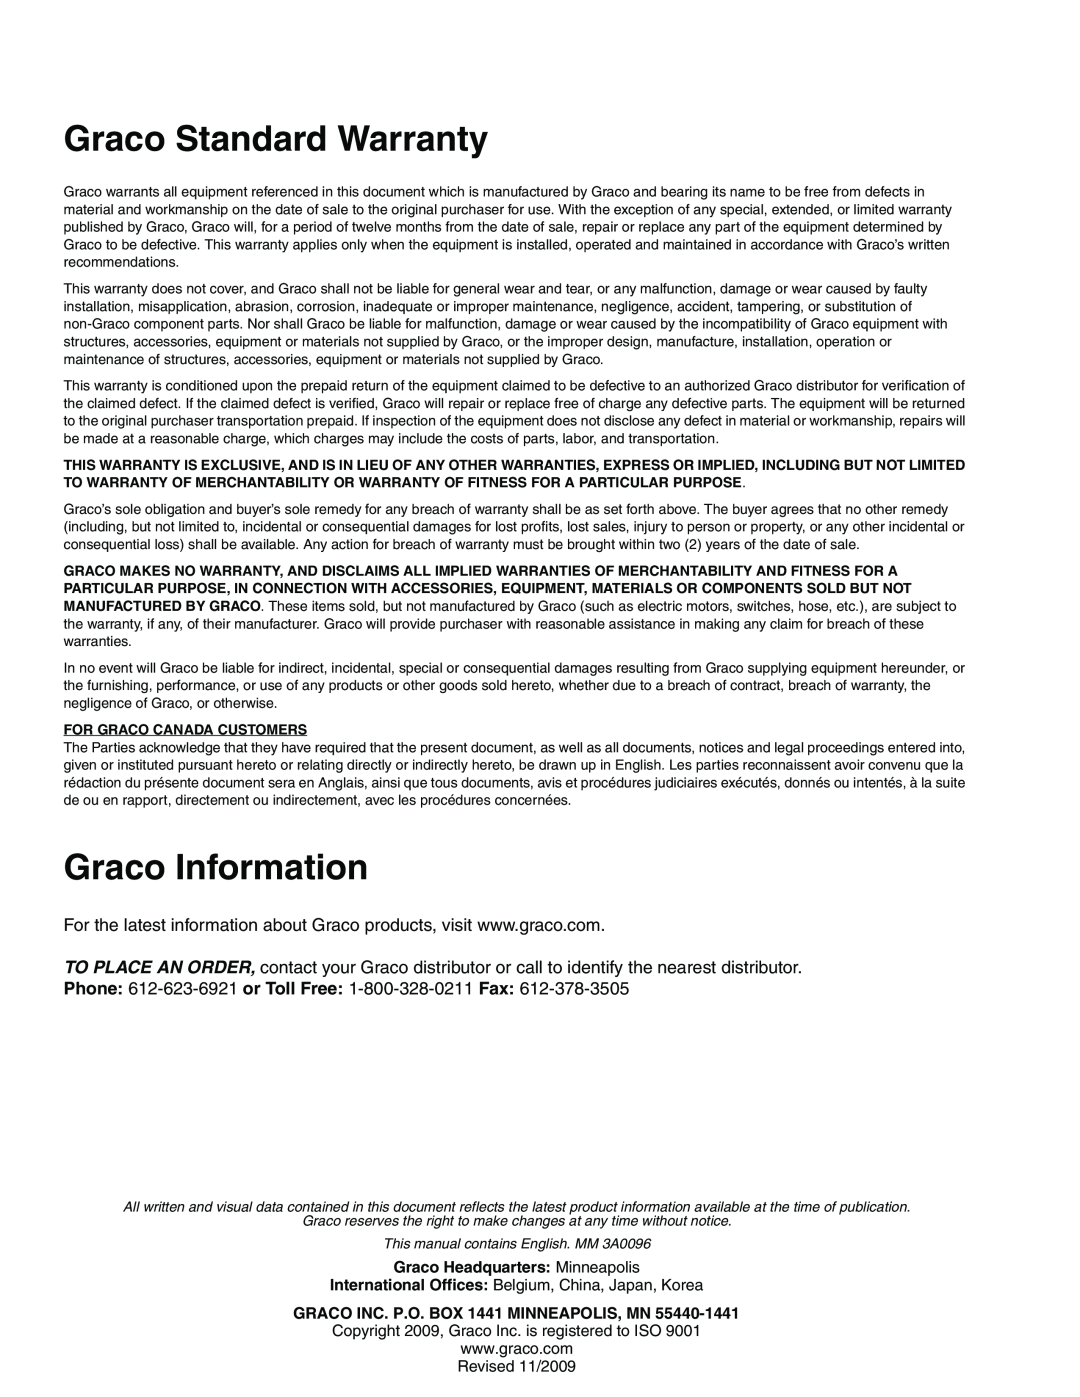 Graco 3A0096B important safety instructions Graco Standard Warranty, Graco Information, Graco Headquarters Minneapolis 